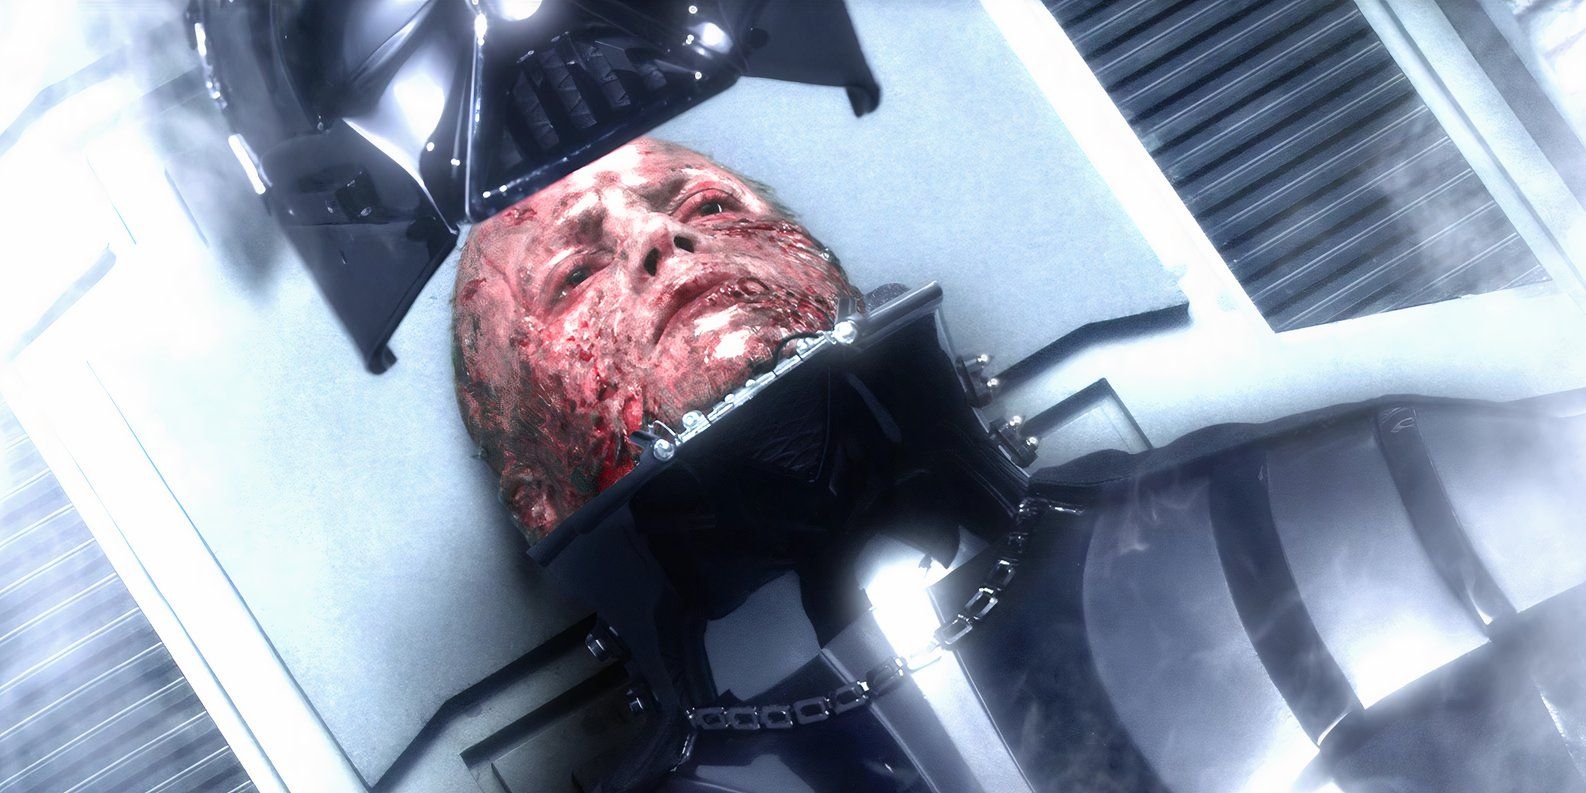 Darth Vader (Hayden Christensen) sits on a table while his helmet is lowered onto his head in Star Wars: Episode III - Revenge of the Sith